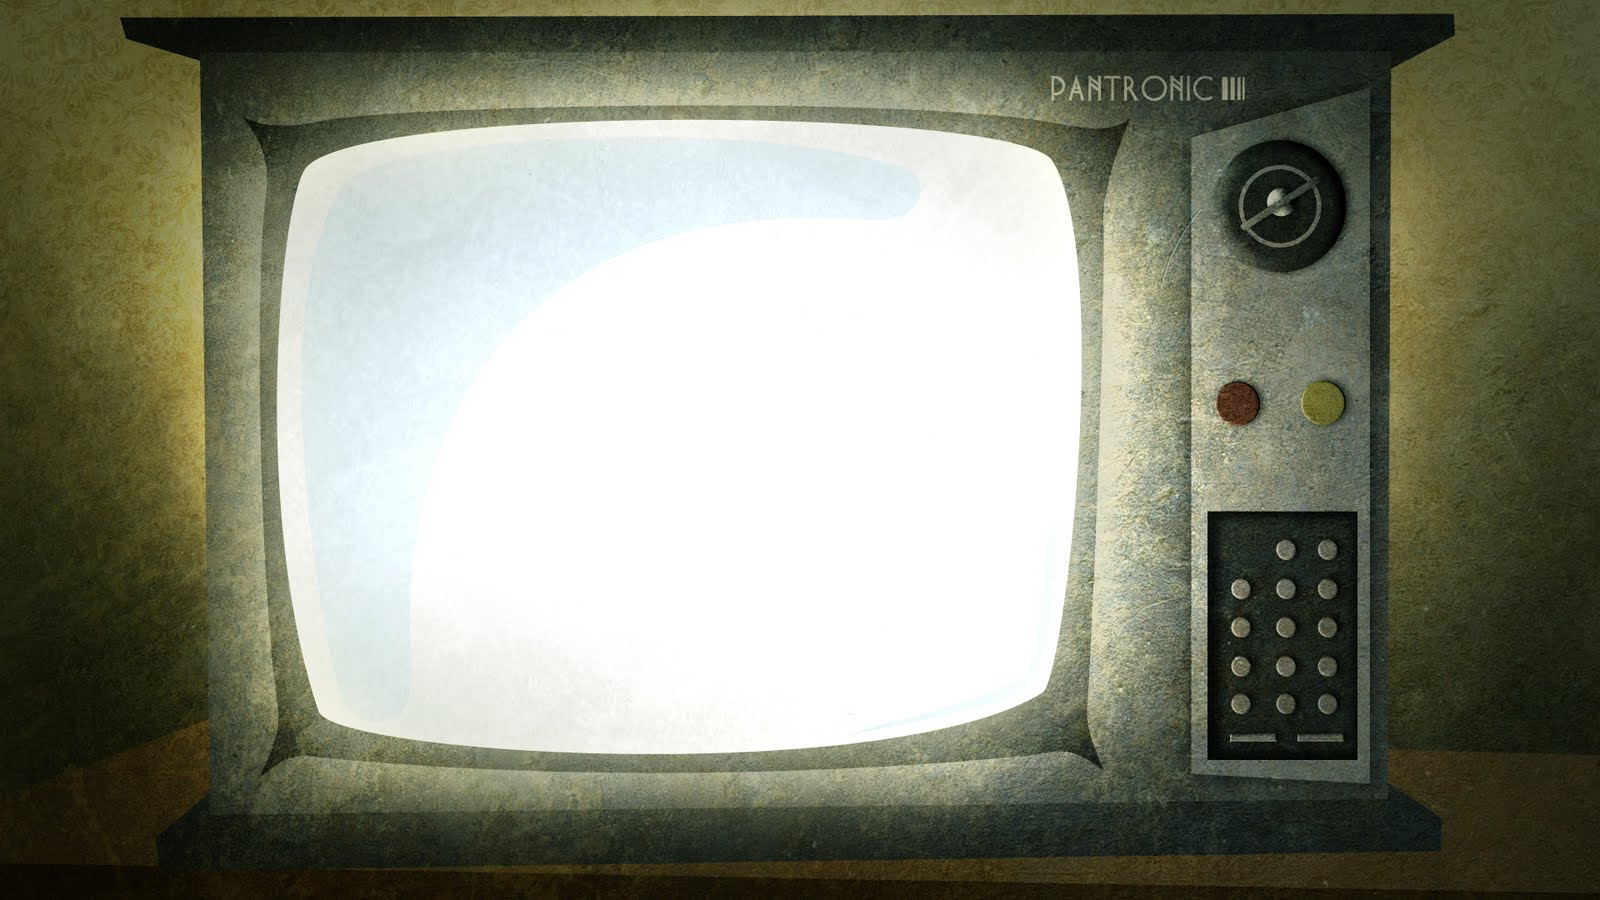 TV Frame Download PowerPoint Backgrounds - PPT Backgrounds